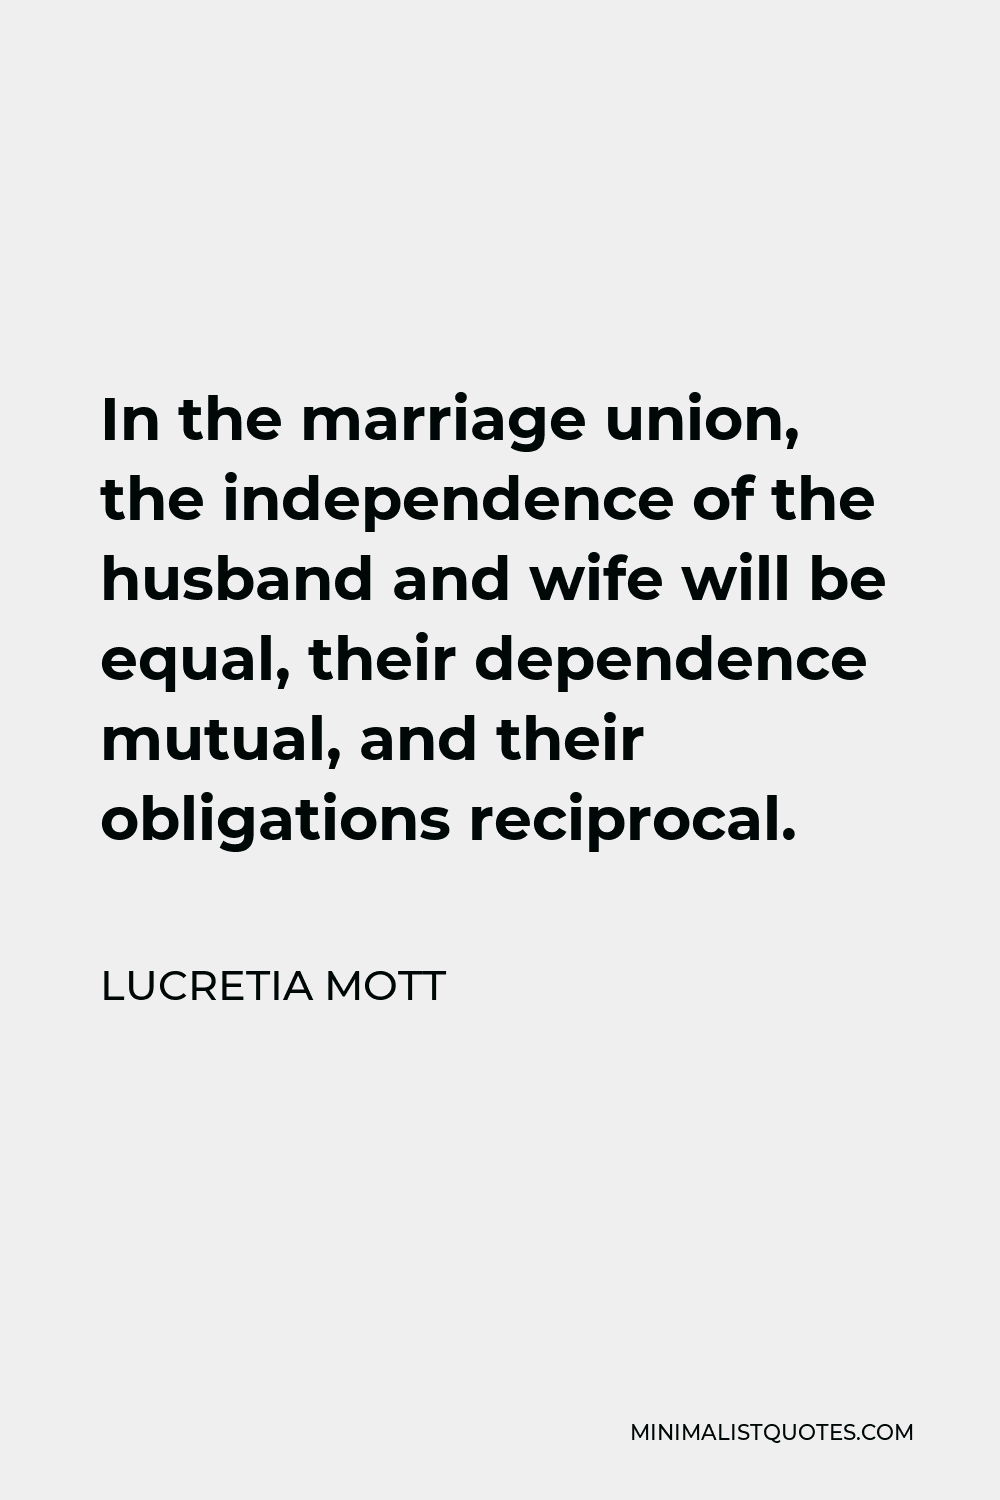 Lucretia Mott Quote - In the marriage union, the independence of the husband and wife will be equal, their dependence mutual, and their obligations reciprocal.